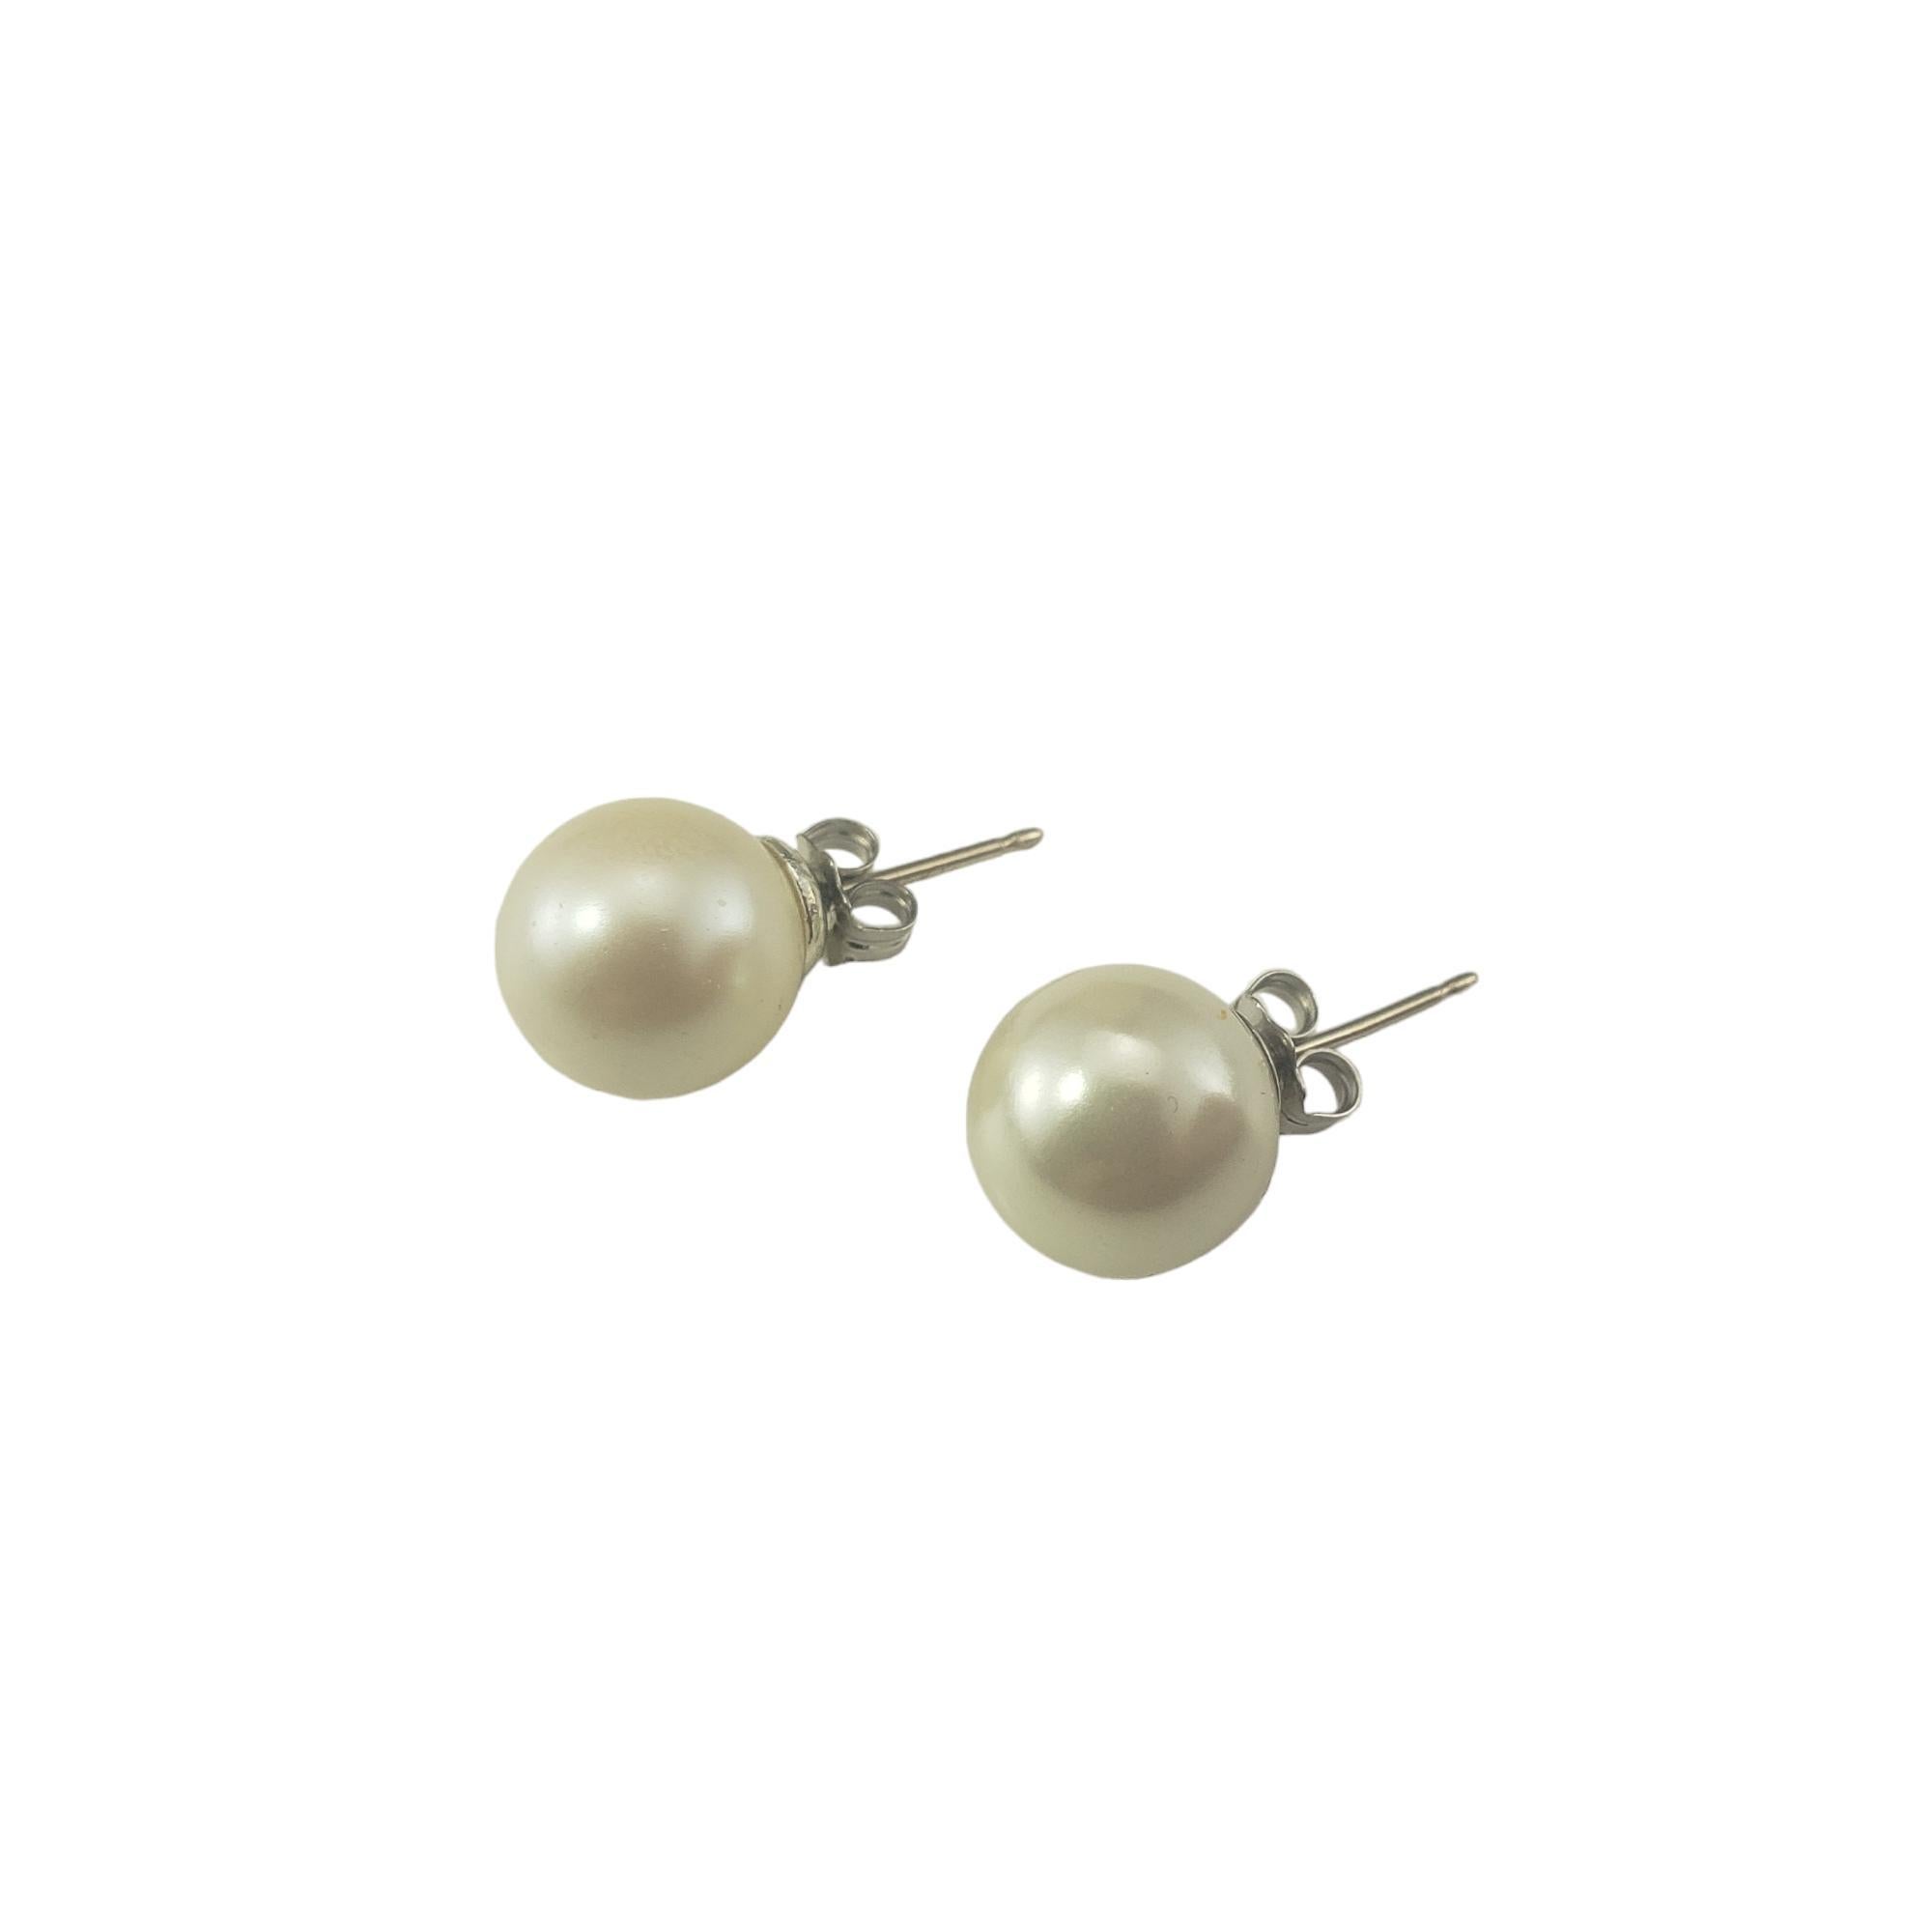 Round Cut 14 Karat White Gold Pearl Stud Earrings #16799 For Sale